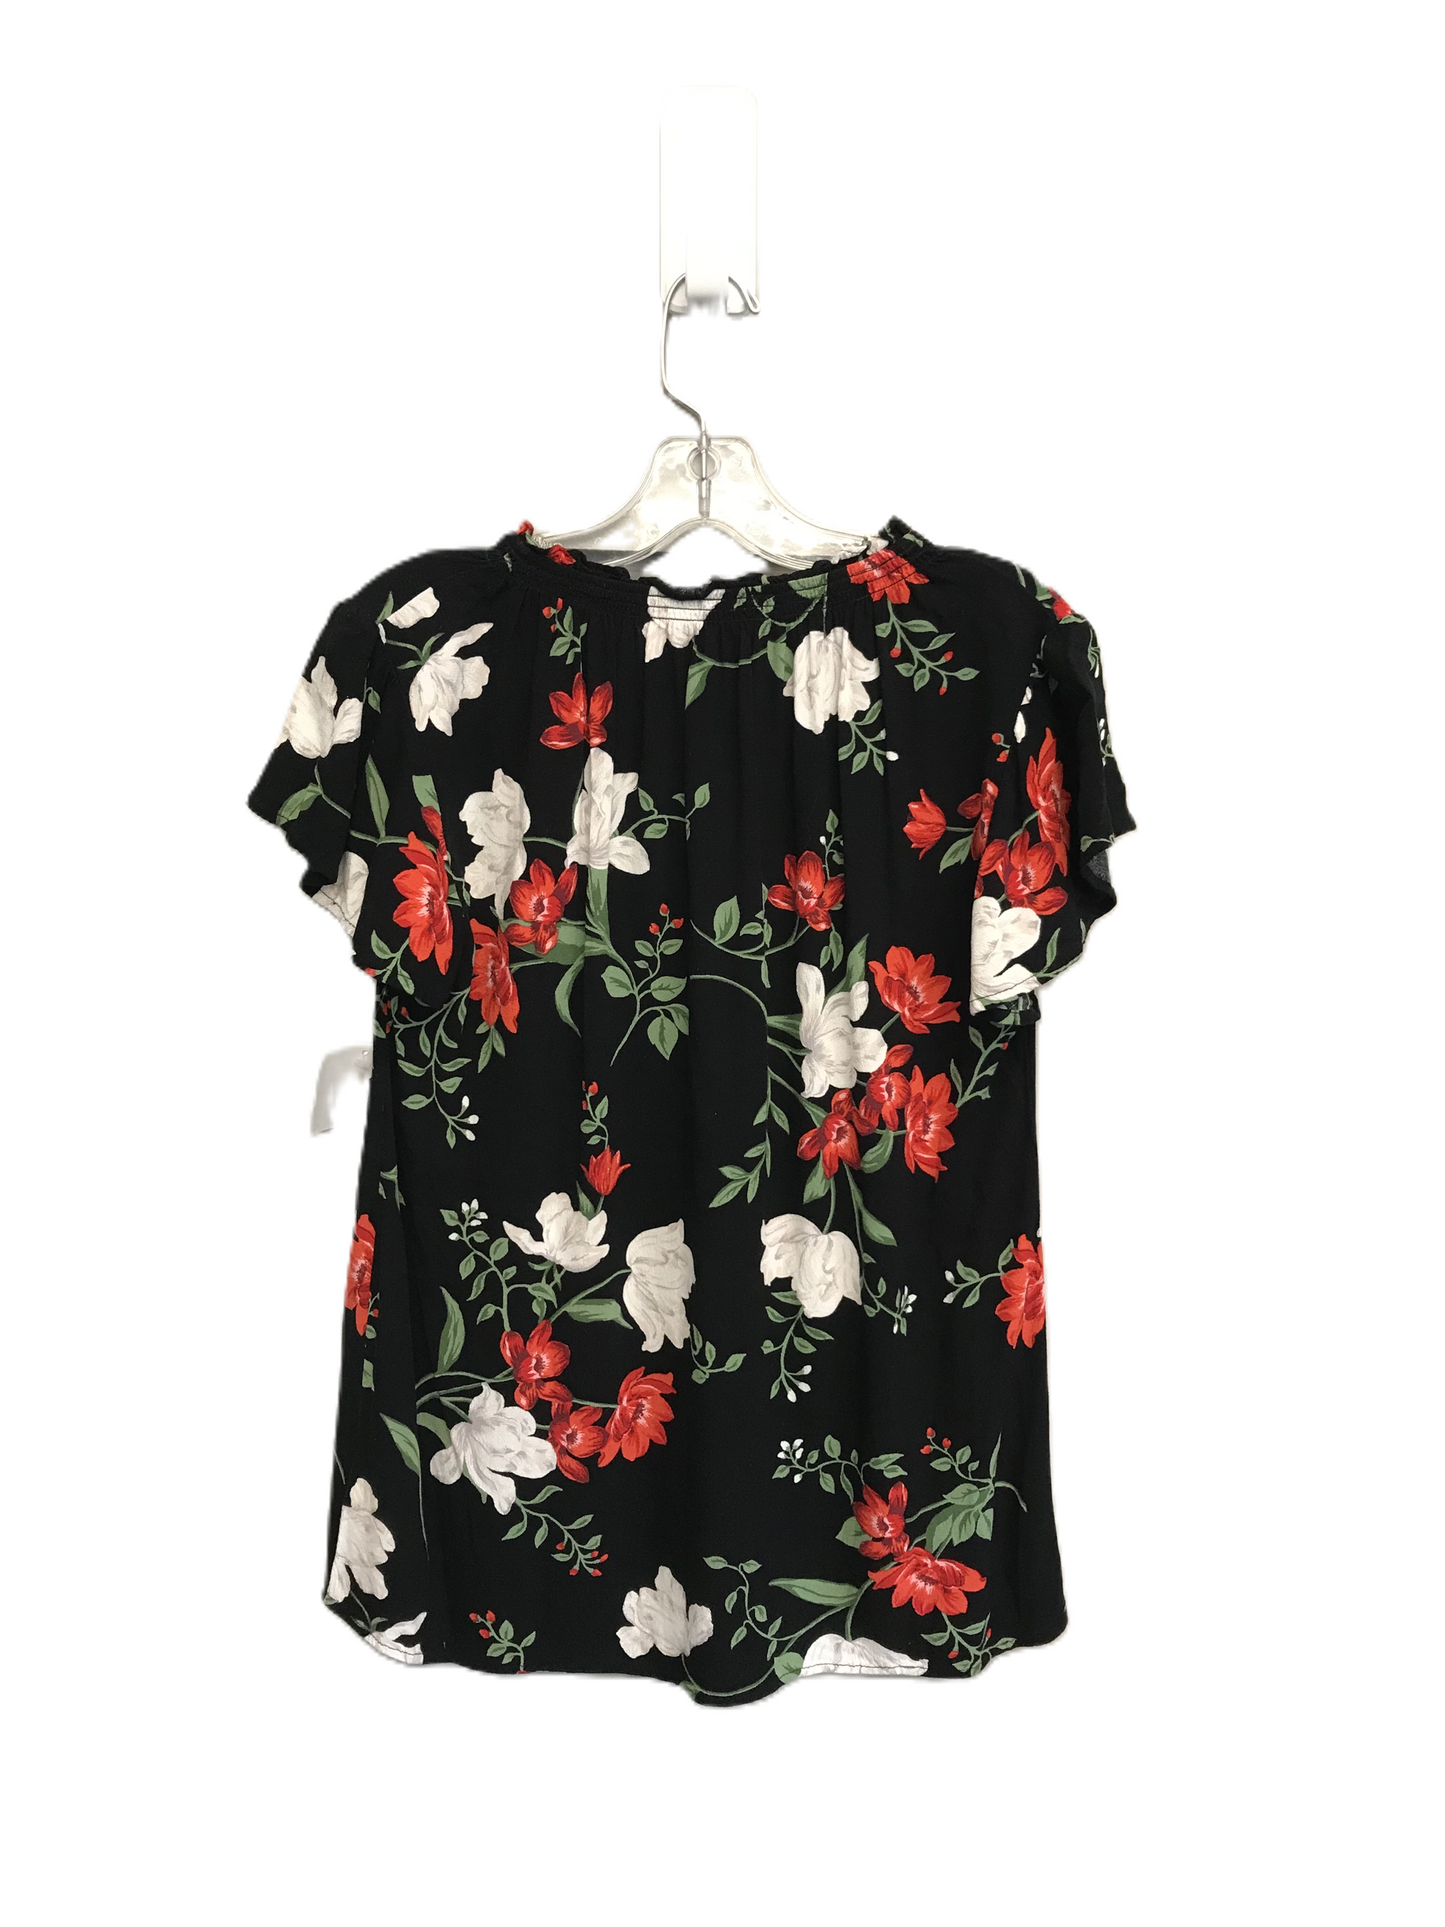 Floral Print Top Short Sleeve By Old Navy, Size: M